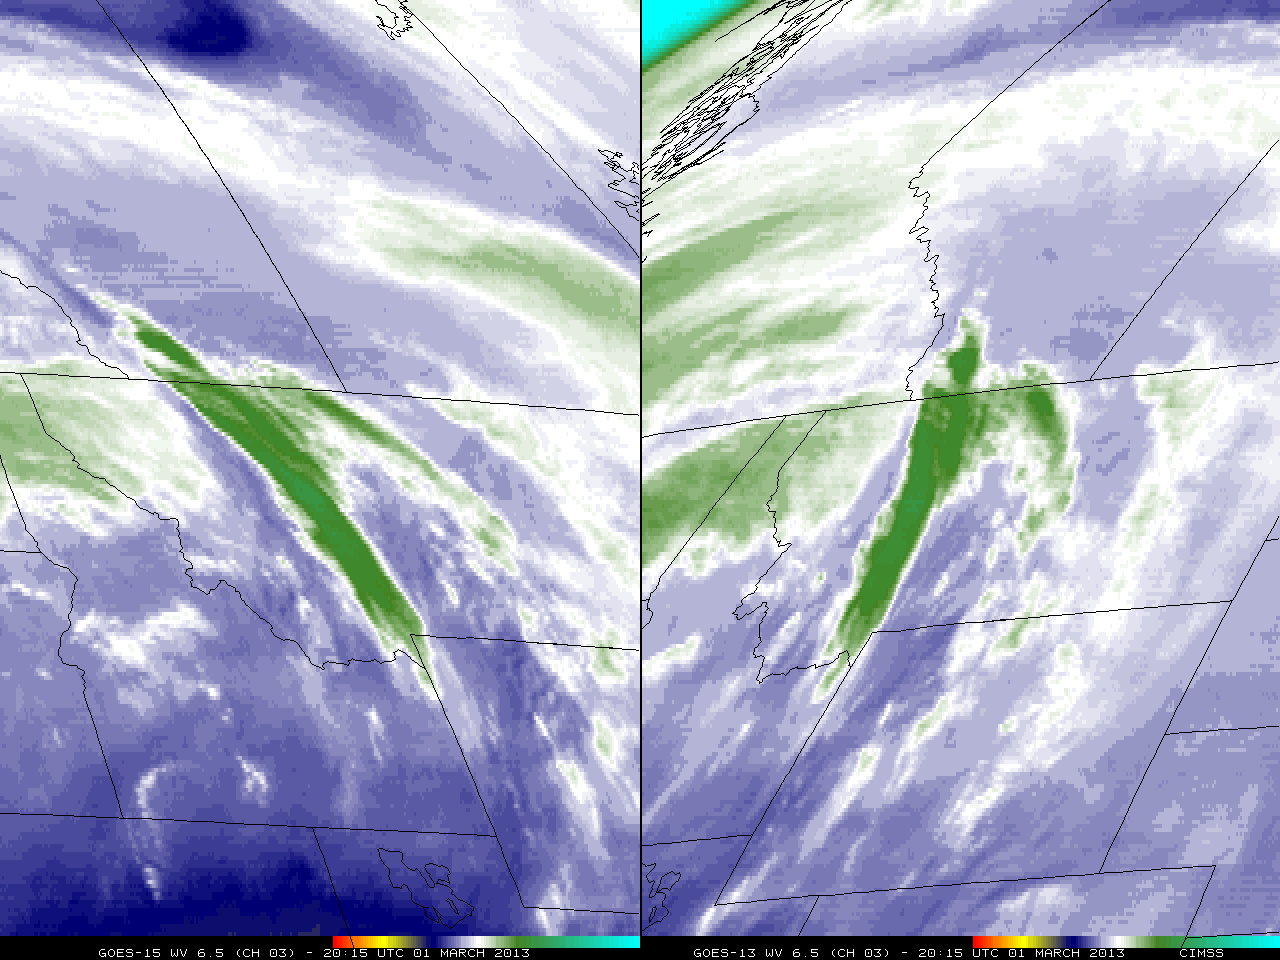 GOES-15 (left) and GOES-13 (right) 6.5 Âµm water vapor channel images (click image to play animation)